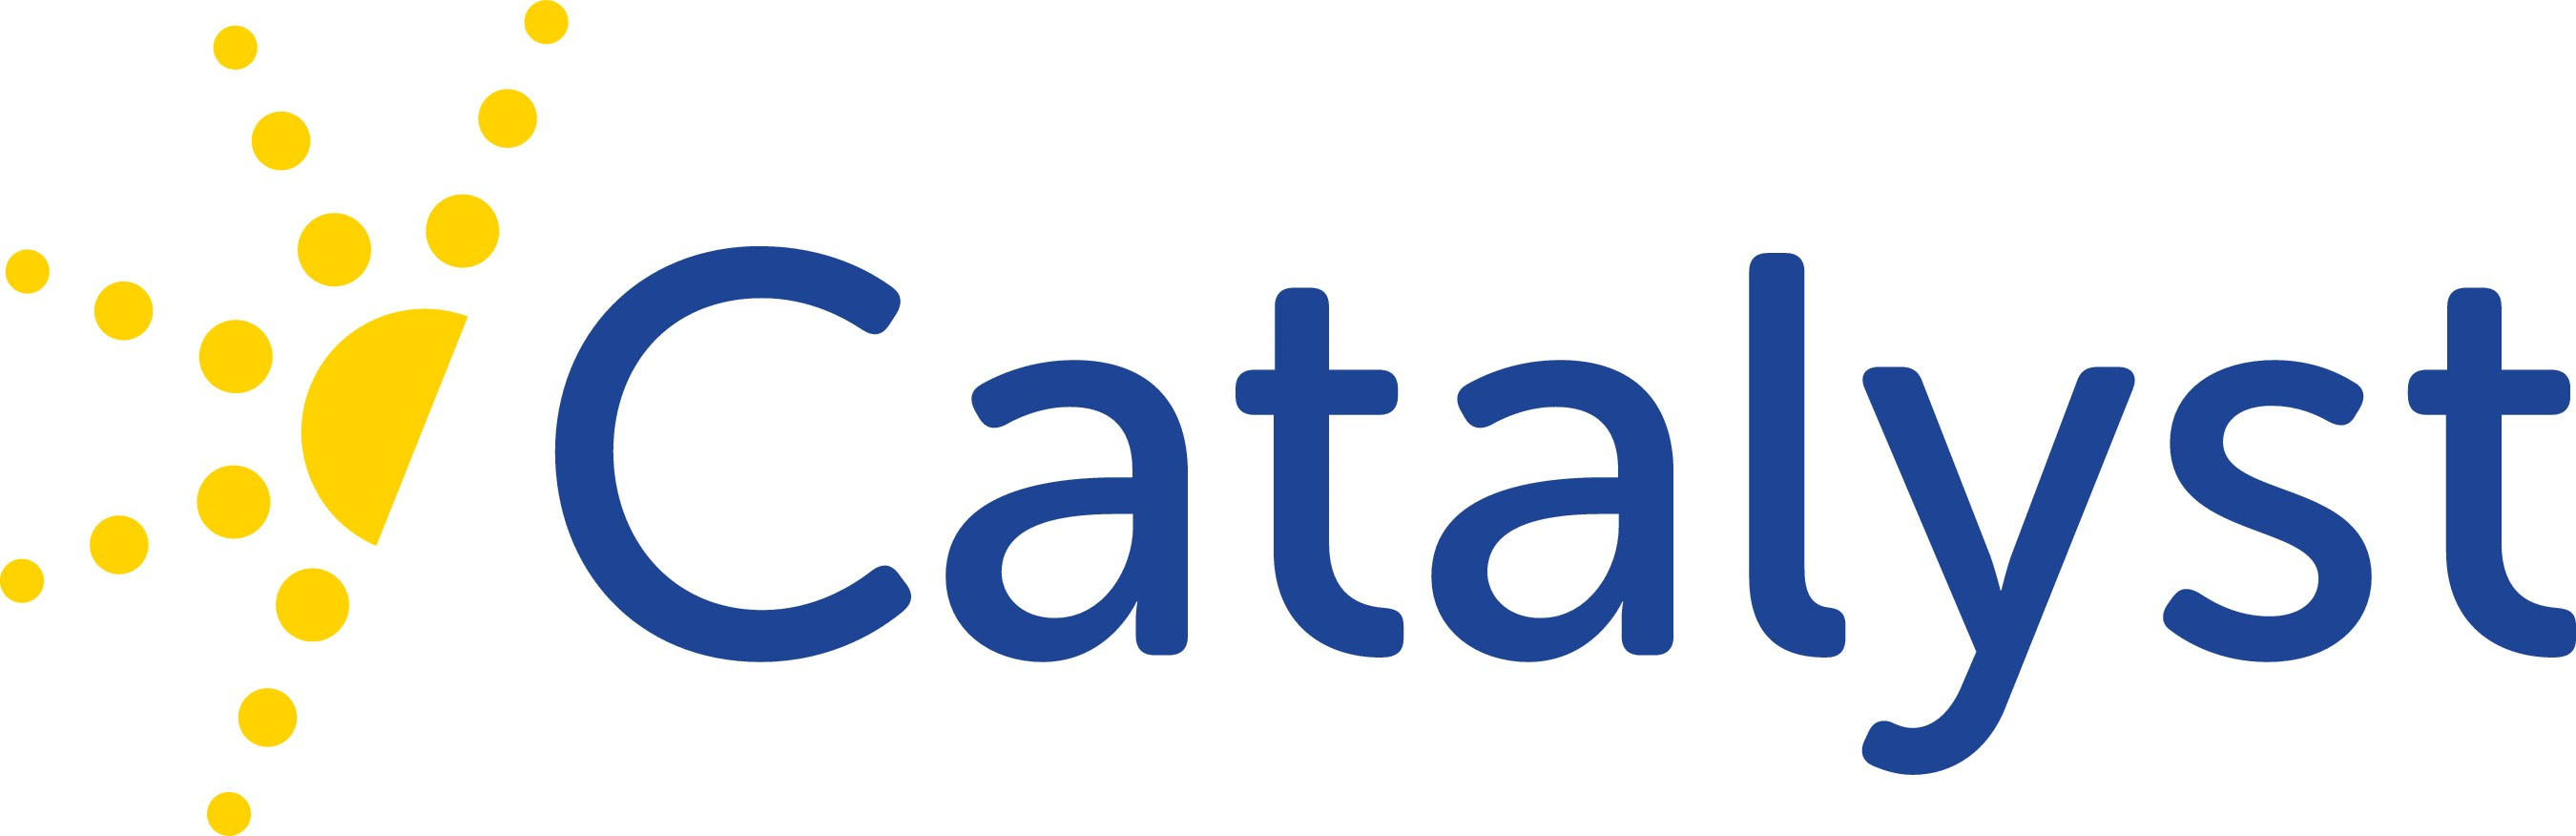 Catalyst designs, hosts and services the world's fastest and most powerful document repositories for large-scale discovery and regulatory compliance.